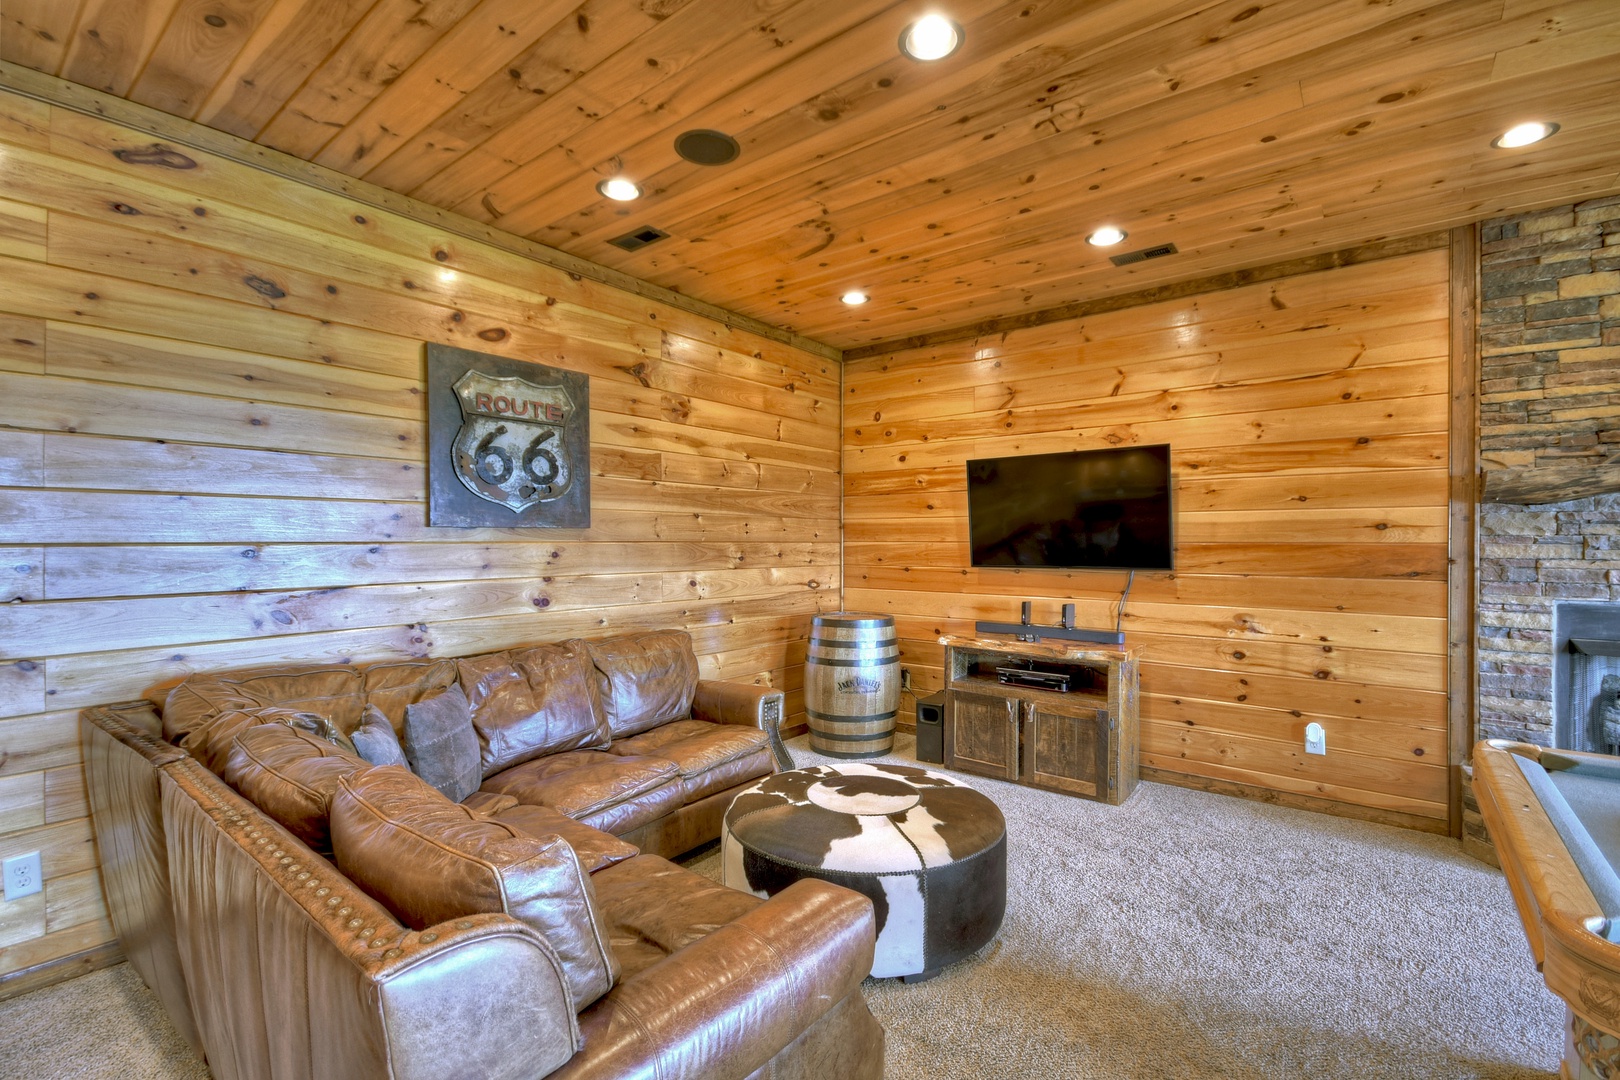 Grand Bluff Retreat- Lounge area with TV in the recreation room